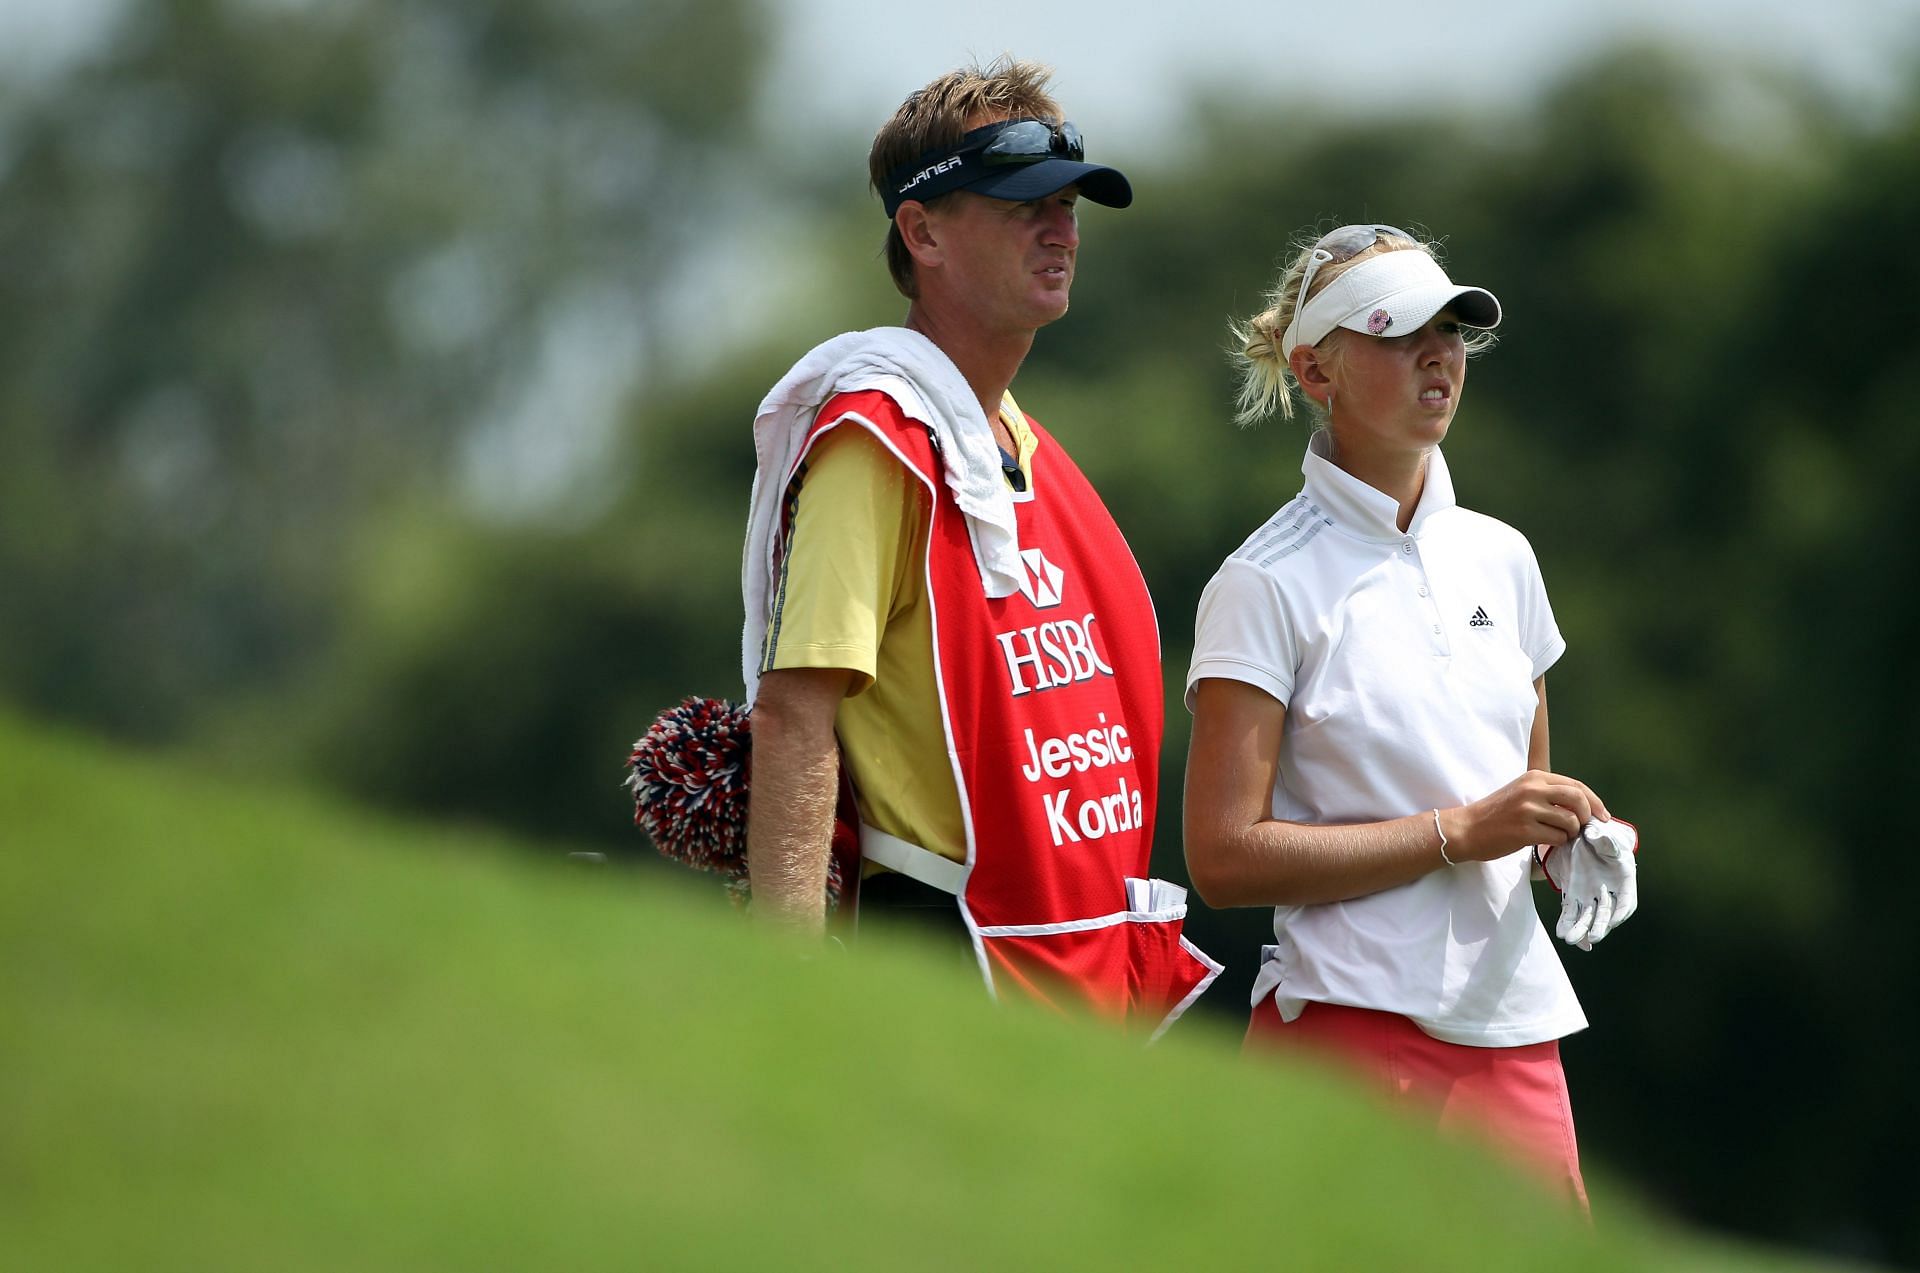 Petr Korda competed alongside his daughter Nelly Korda at the 2021 PNC Championship